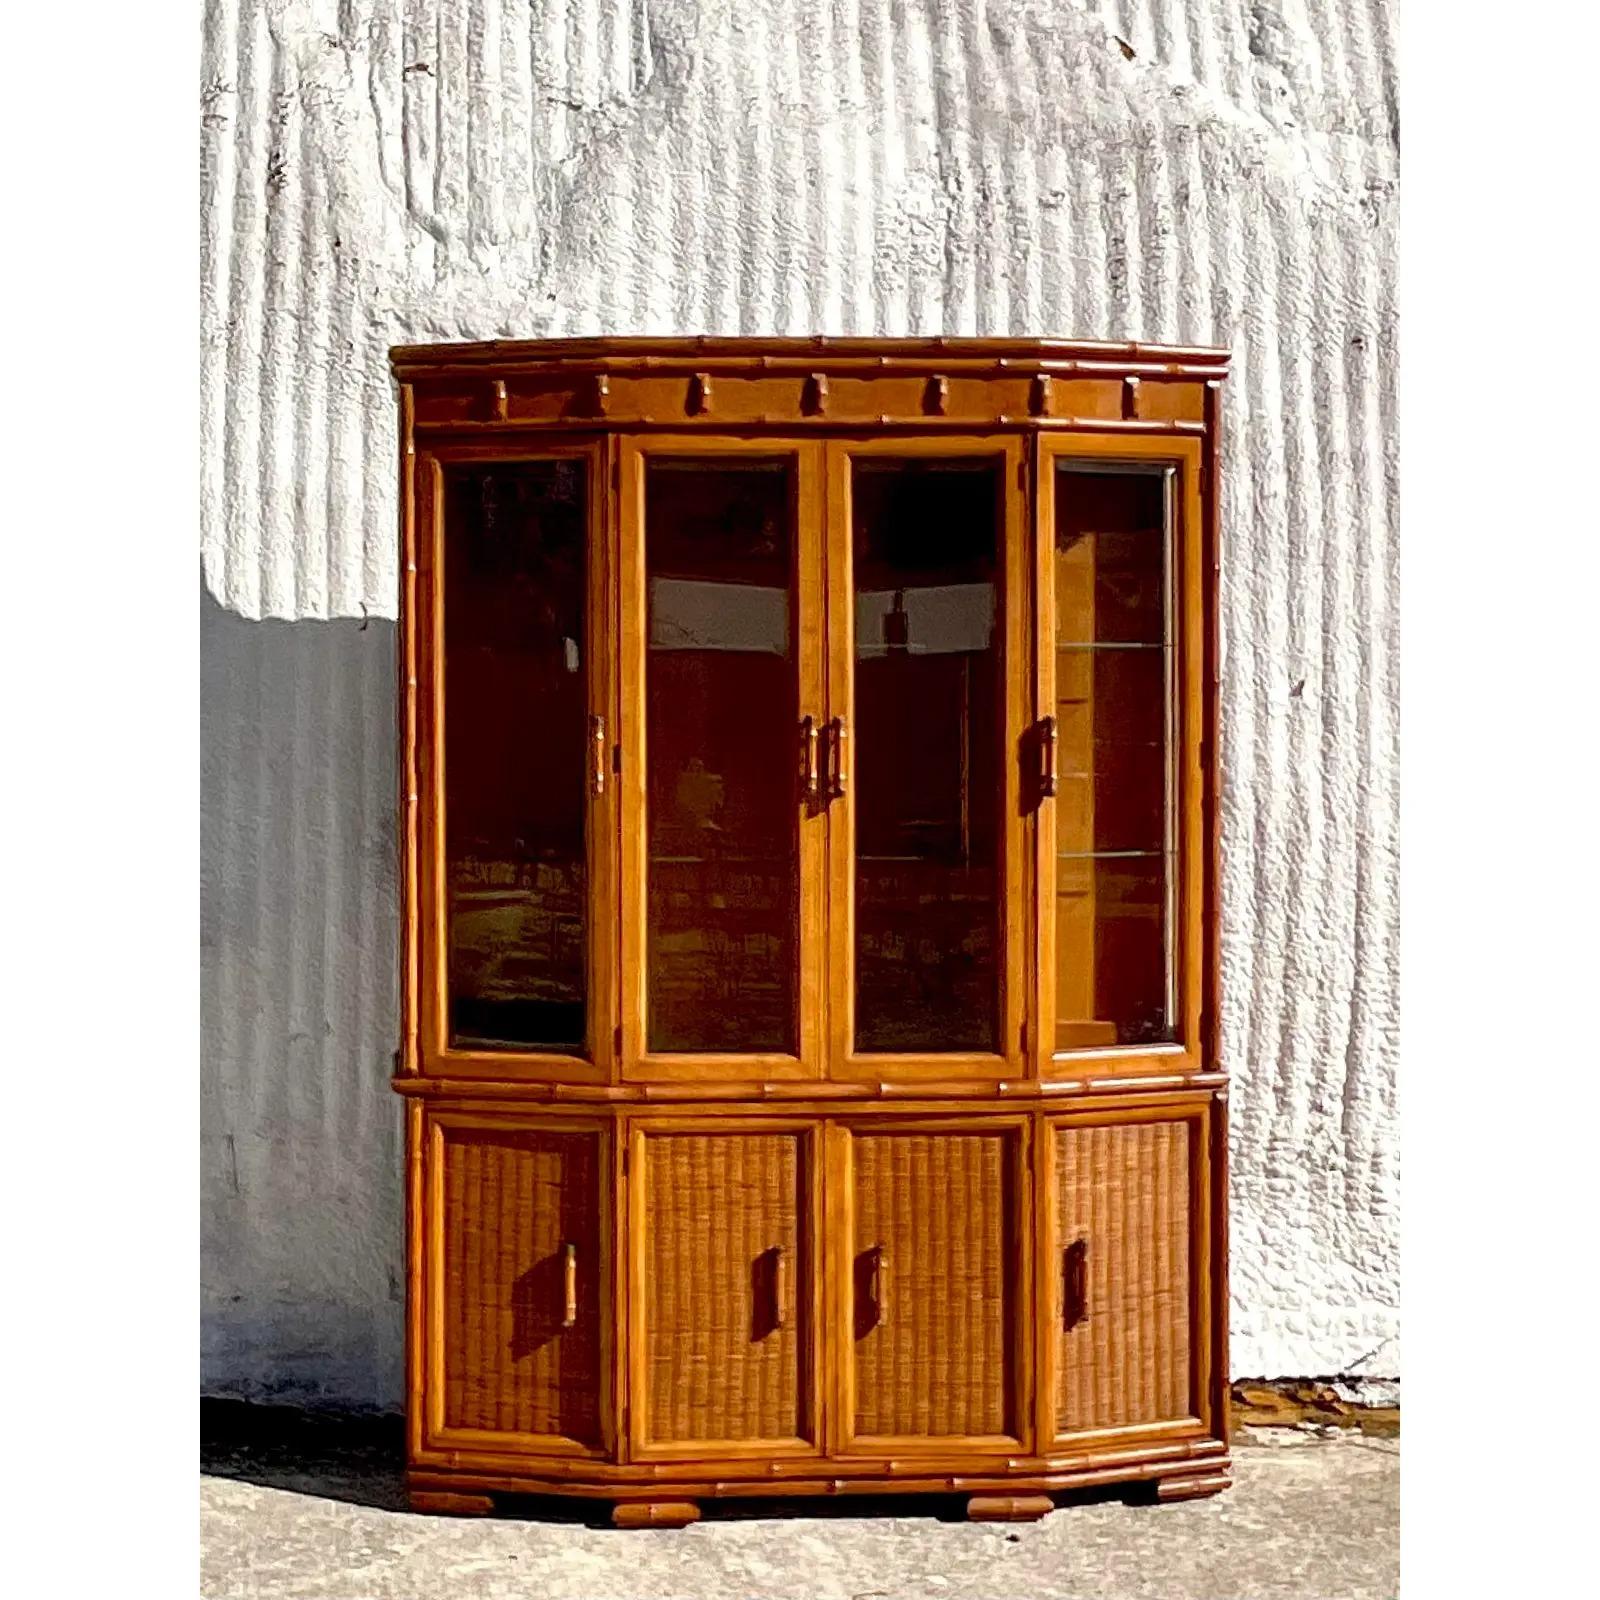 A fabulous vintage Coastal MCM china cabinet. Made by the iconic American Of Martinsville. Beautiful faux carved bamboo with a chic angled design. Lots of great storage below. Acquired from a Palm Beach estate.